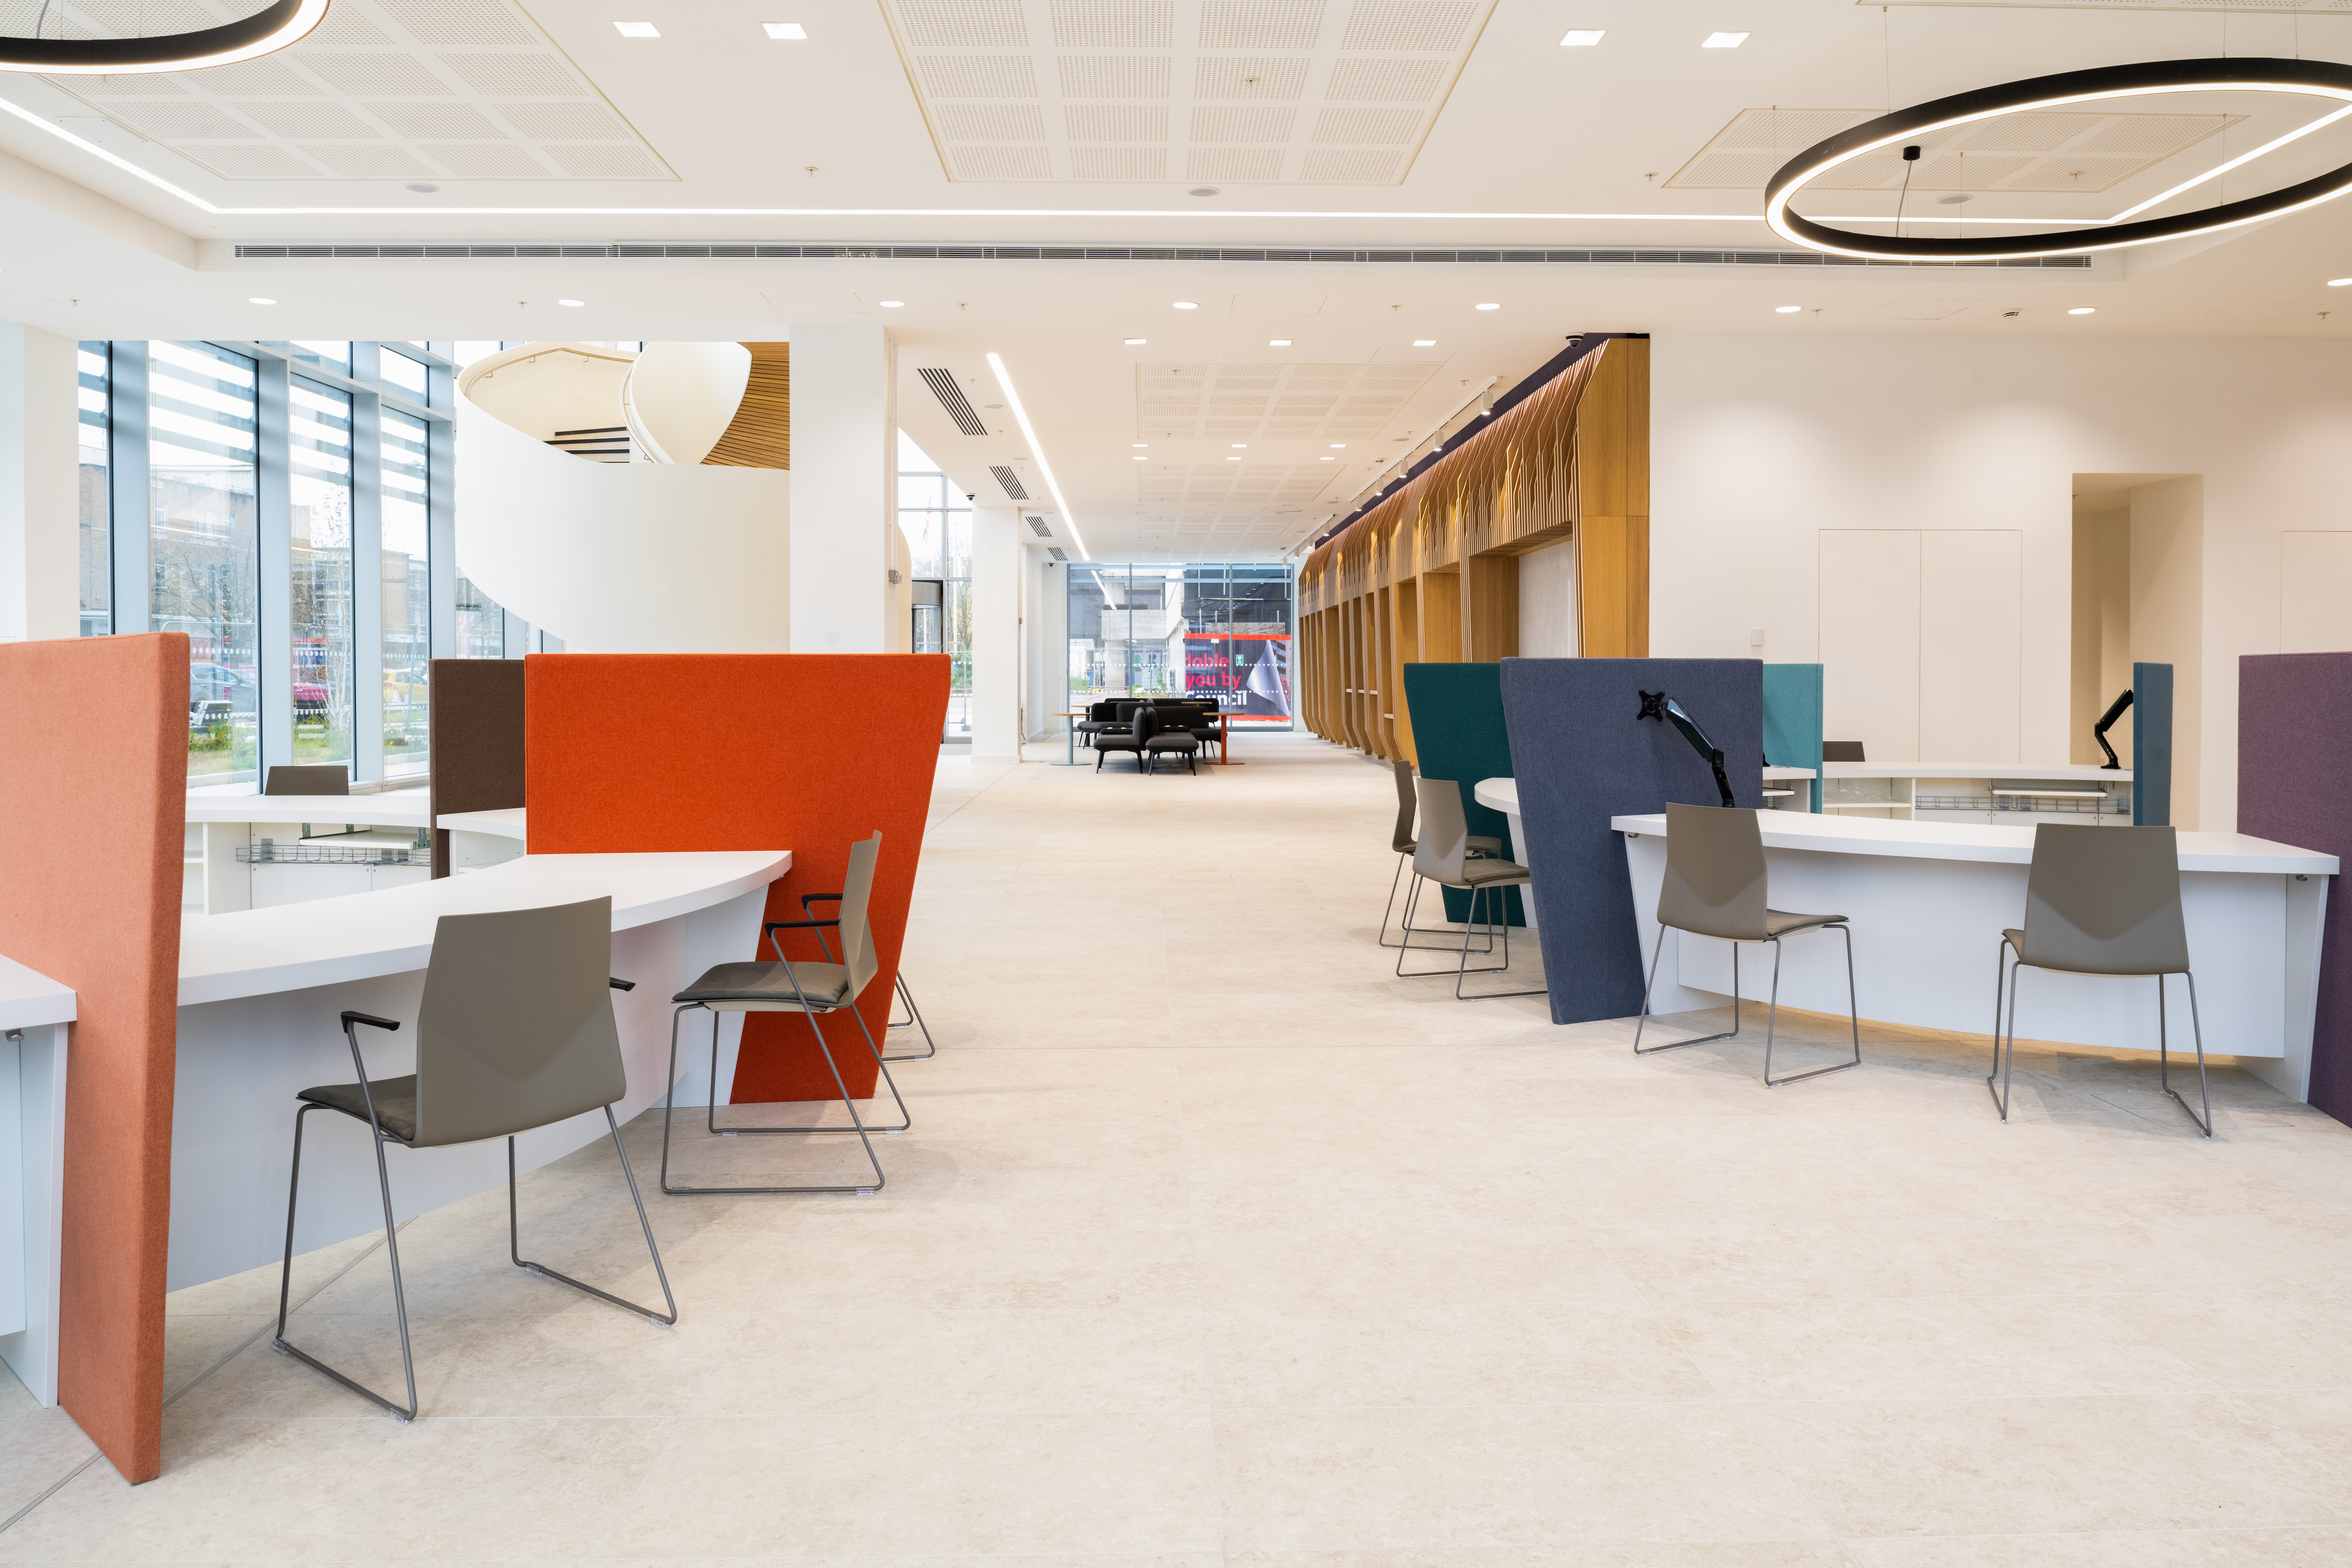 Ocee and Four Design office furniture in Crawley Council Town Hall reception area.